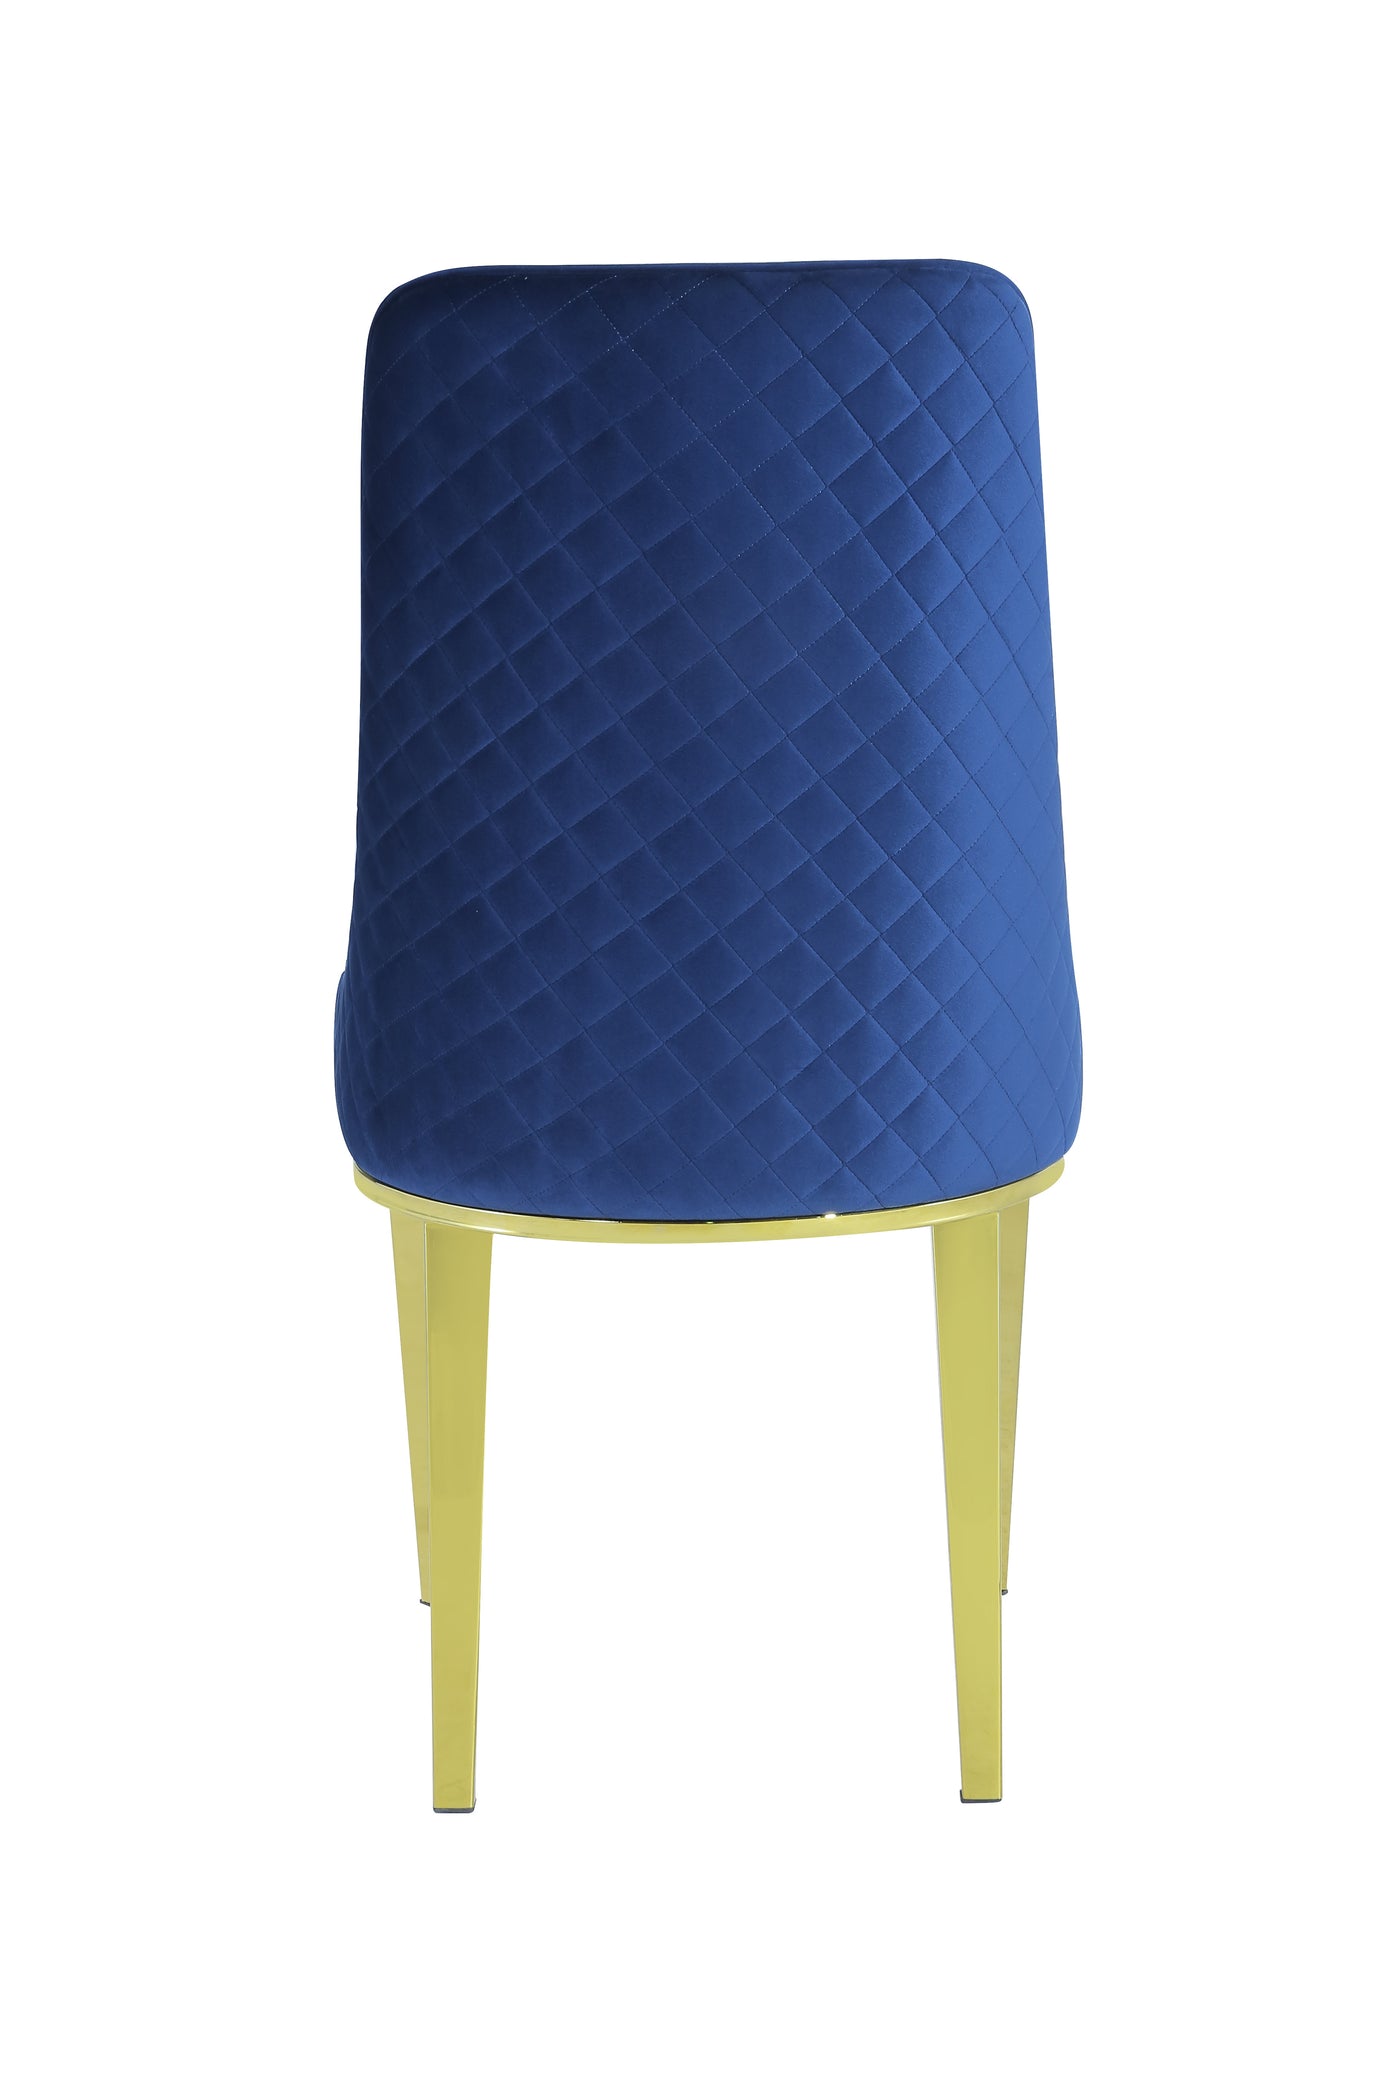 Levante Dining Chair Gold/Navy - Future Classics Furniture